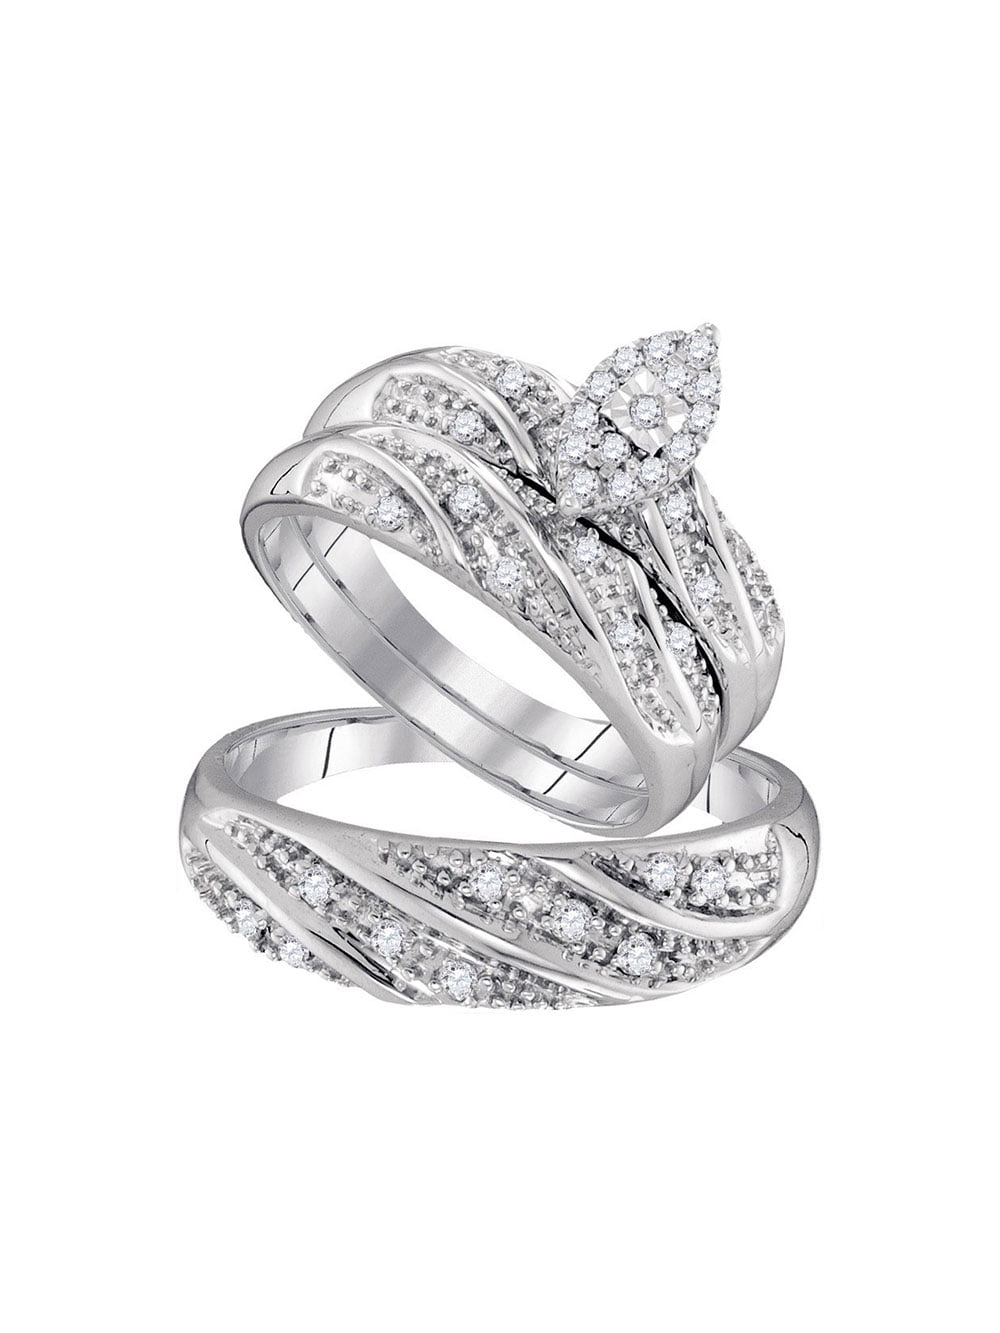 Details about   Engagement Wedding Bridal Ring Band In Round Diamond in 14k White Gold Finish 